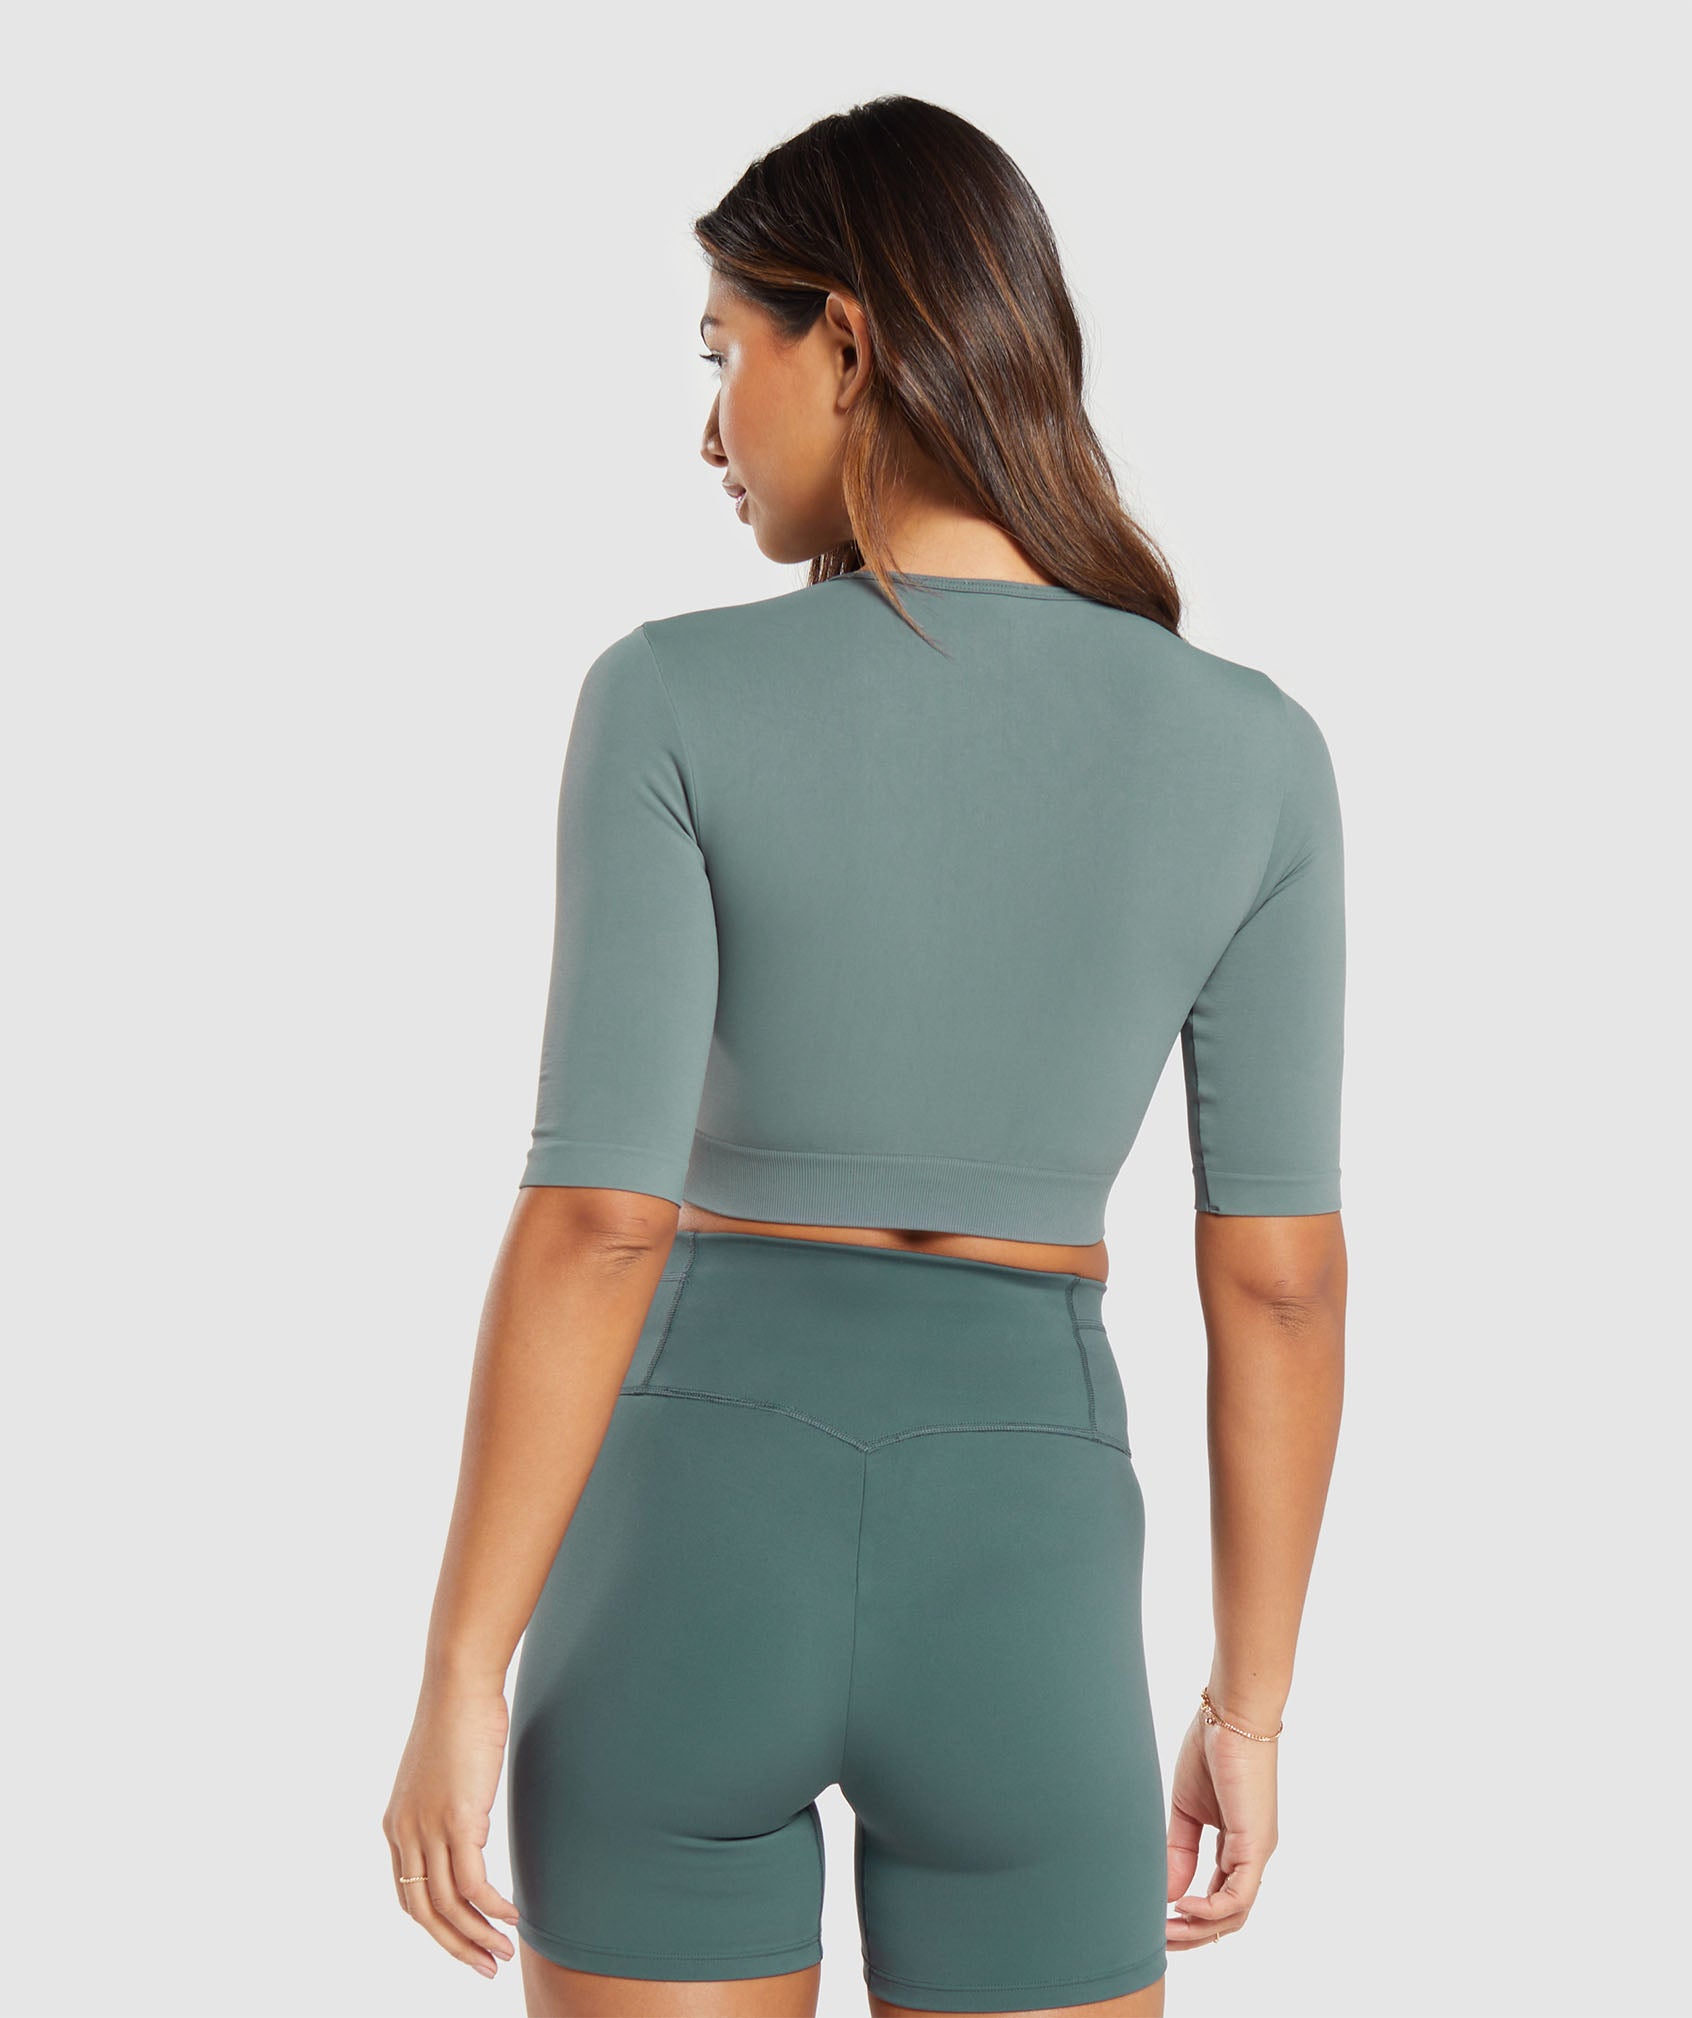 Everyday Seamless Crop Top in Cargo Teal - view 2